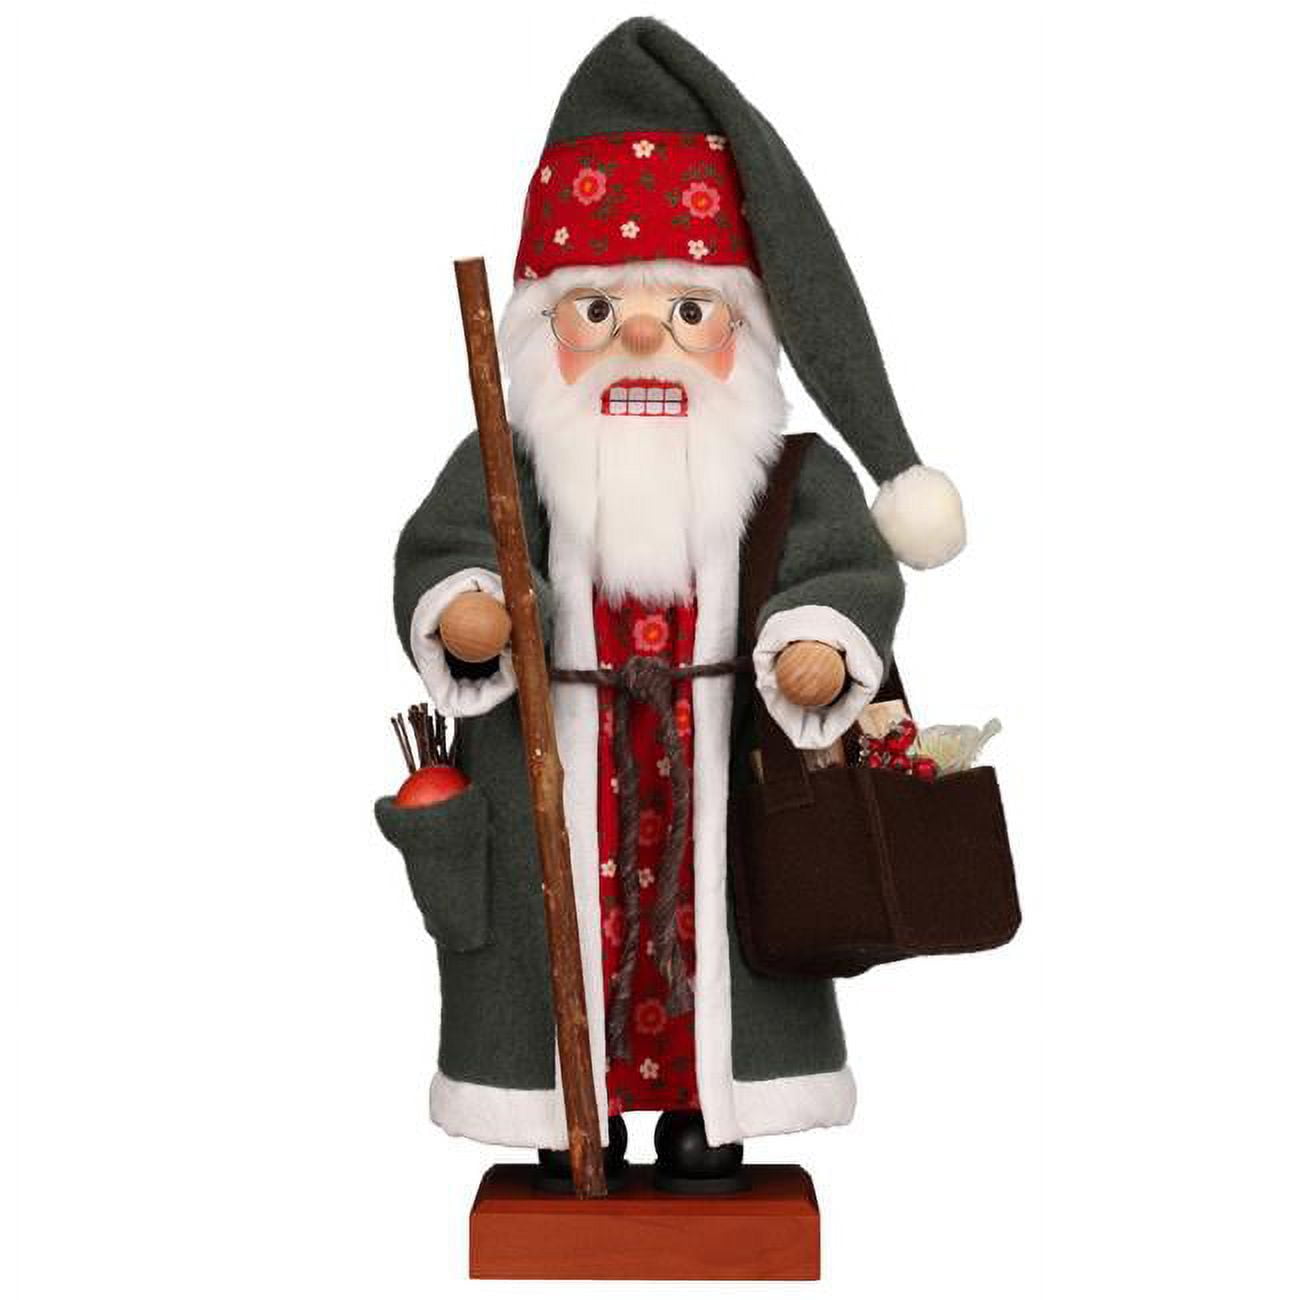 Picture of Alexander Taron 0-833 Christian Ulbricht Nutcracker - Santa with Fruit - Limited Edition of 1000 Piece